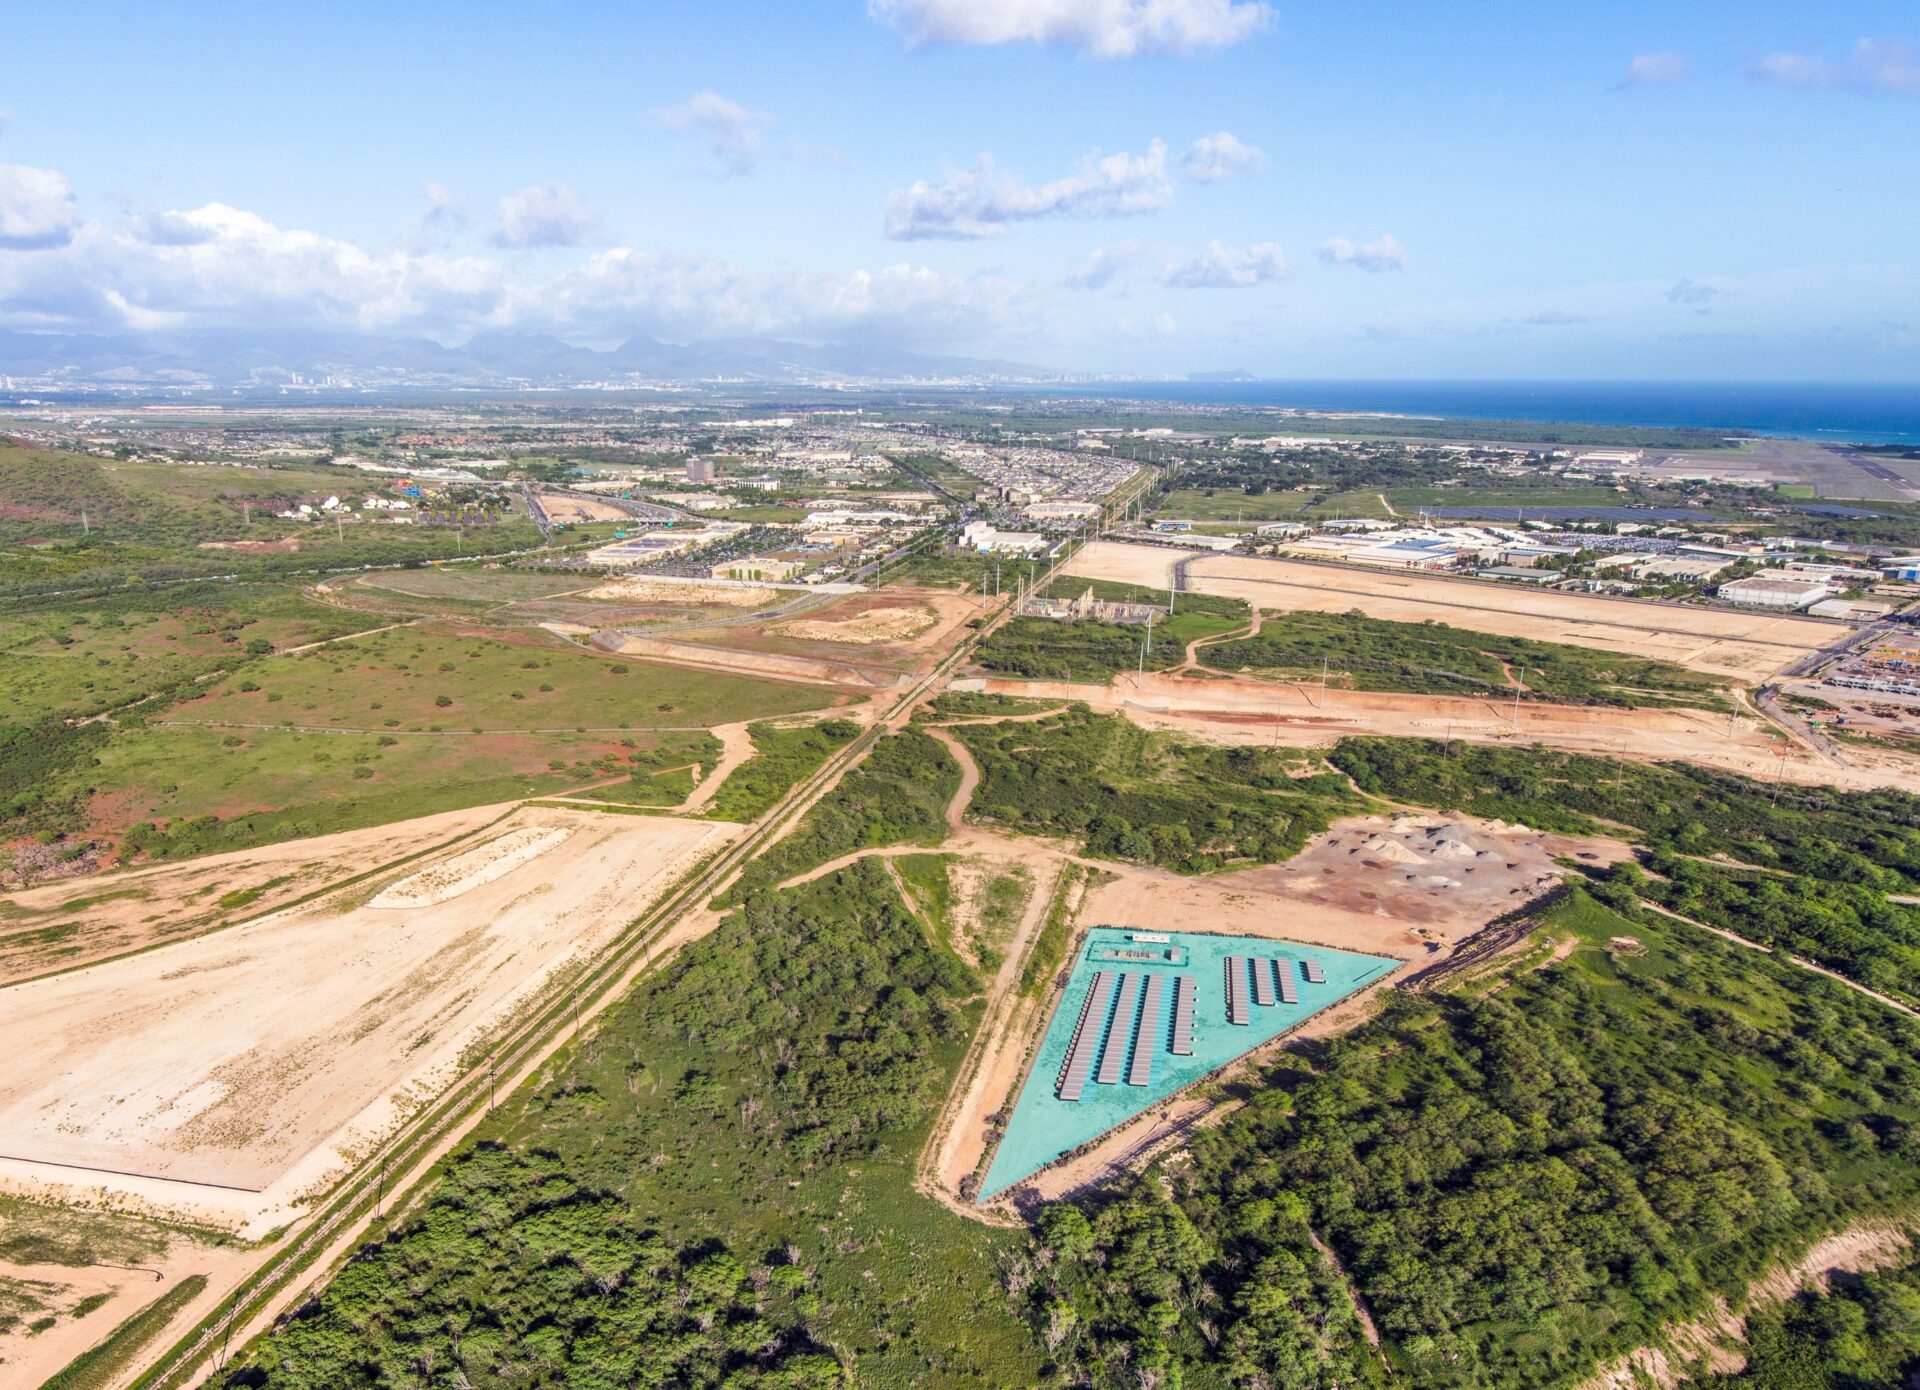 Rendering: Aerial View of Plus Power’s 185 MW / 565 MWh Kapolei Energy Storage Project on Oahu